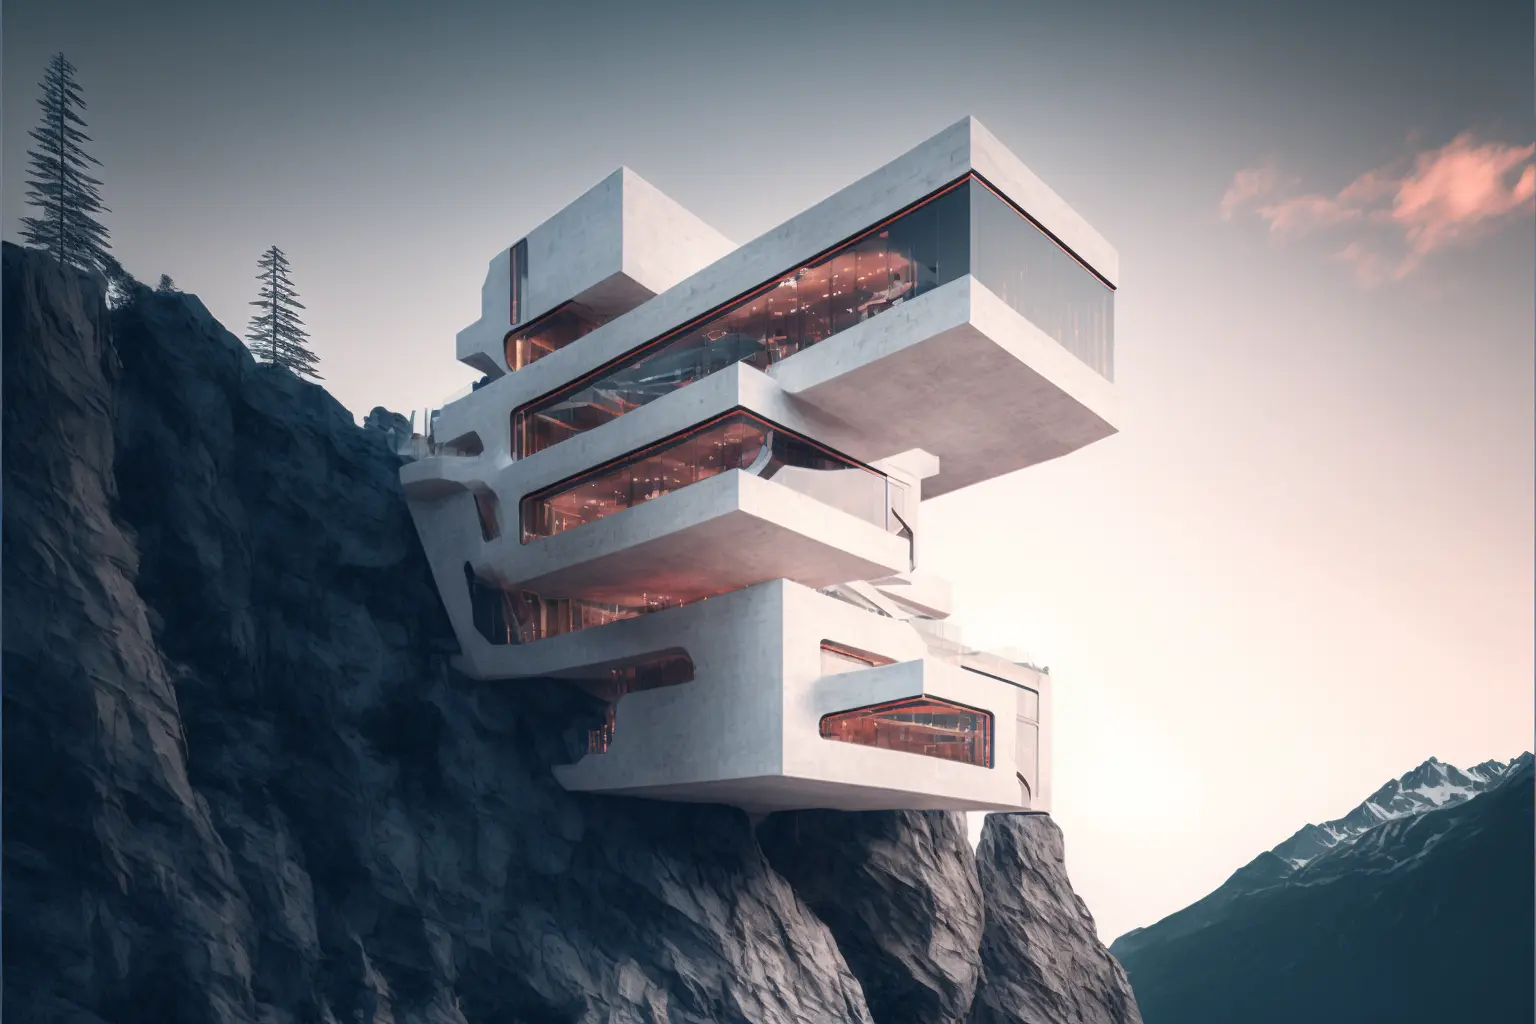 modern resort, staggered and embedded into the side of a mountain, architectural photography, style of archillect, futurism, modernist architecture